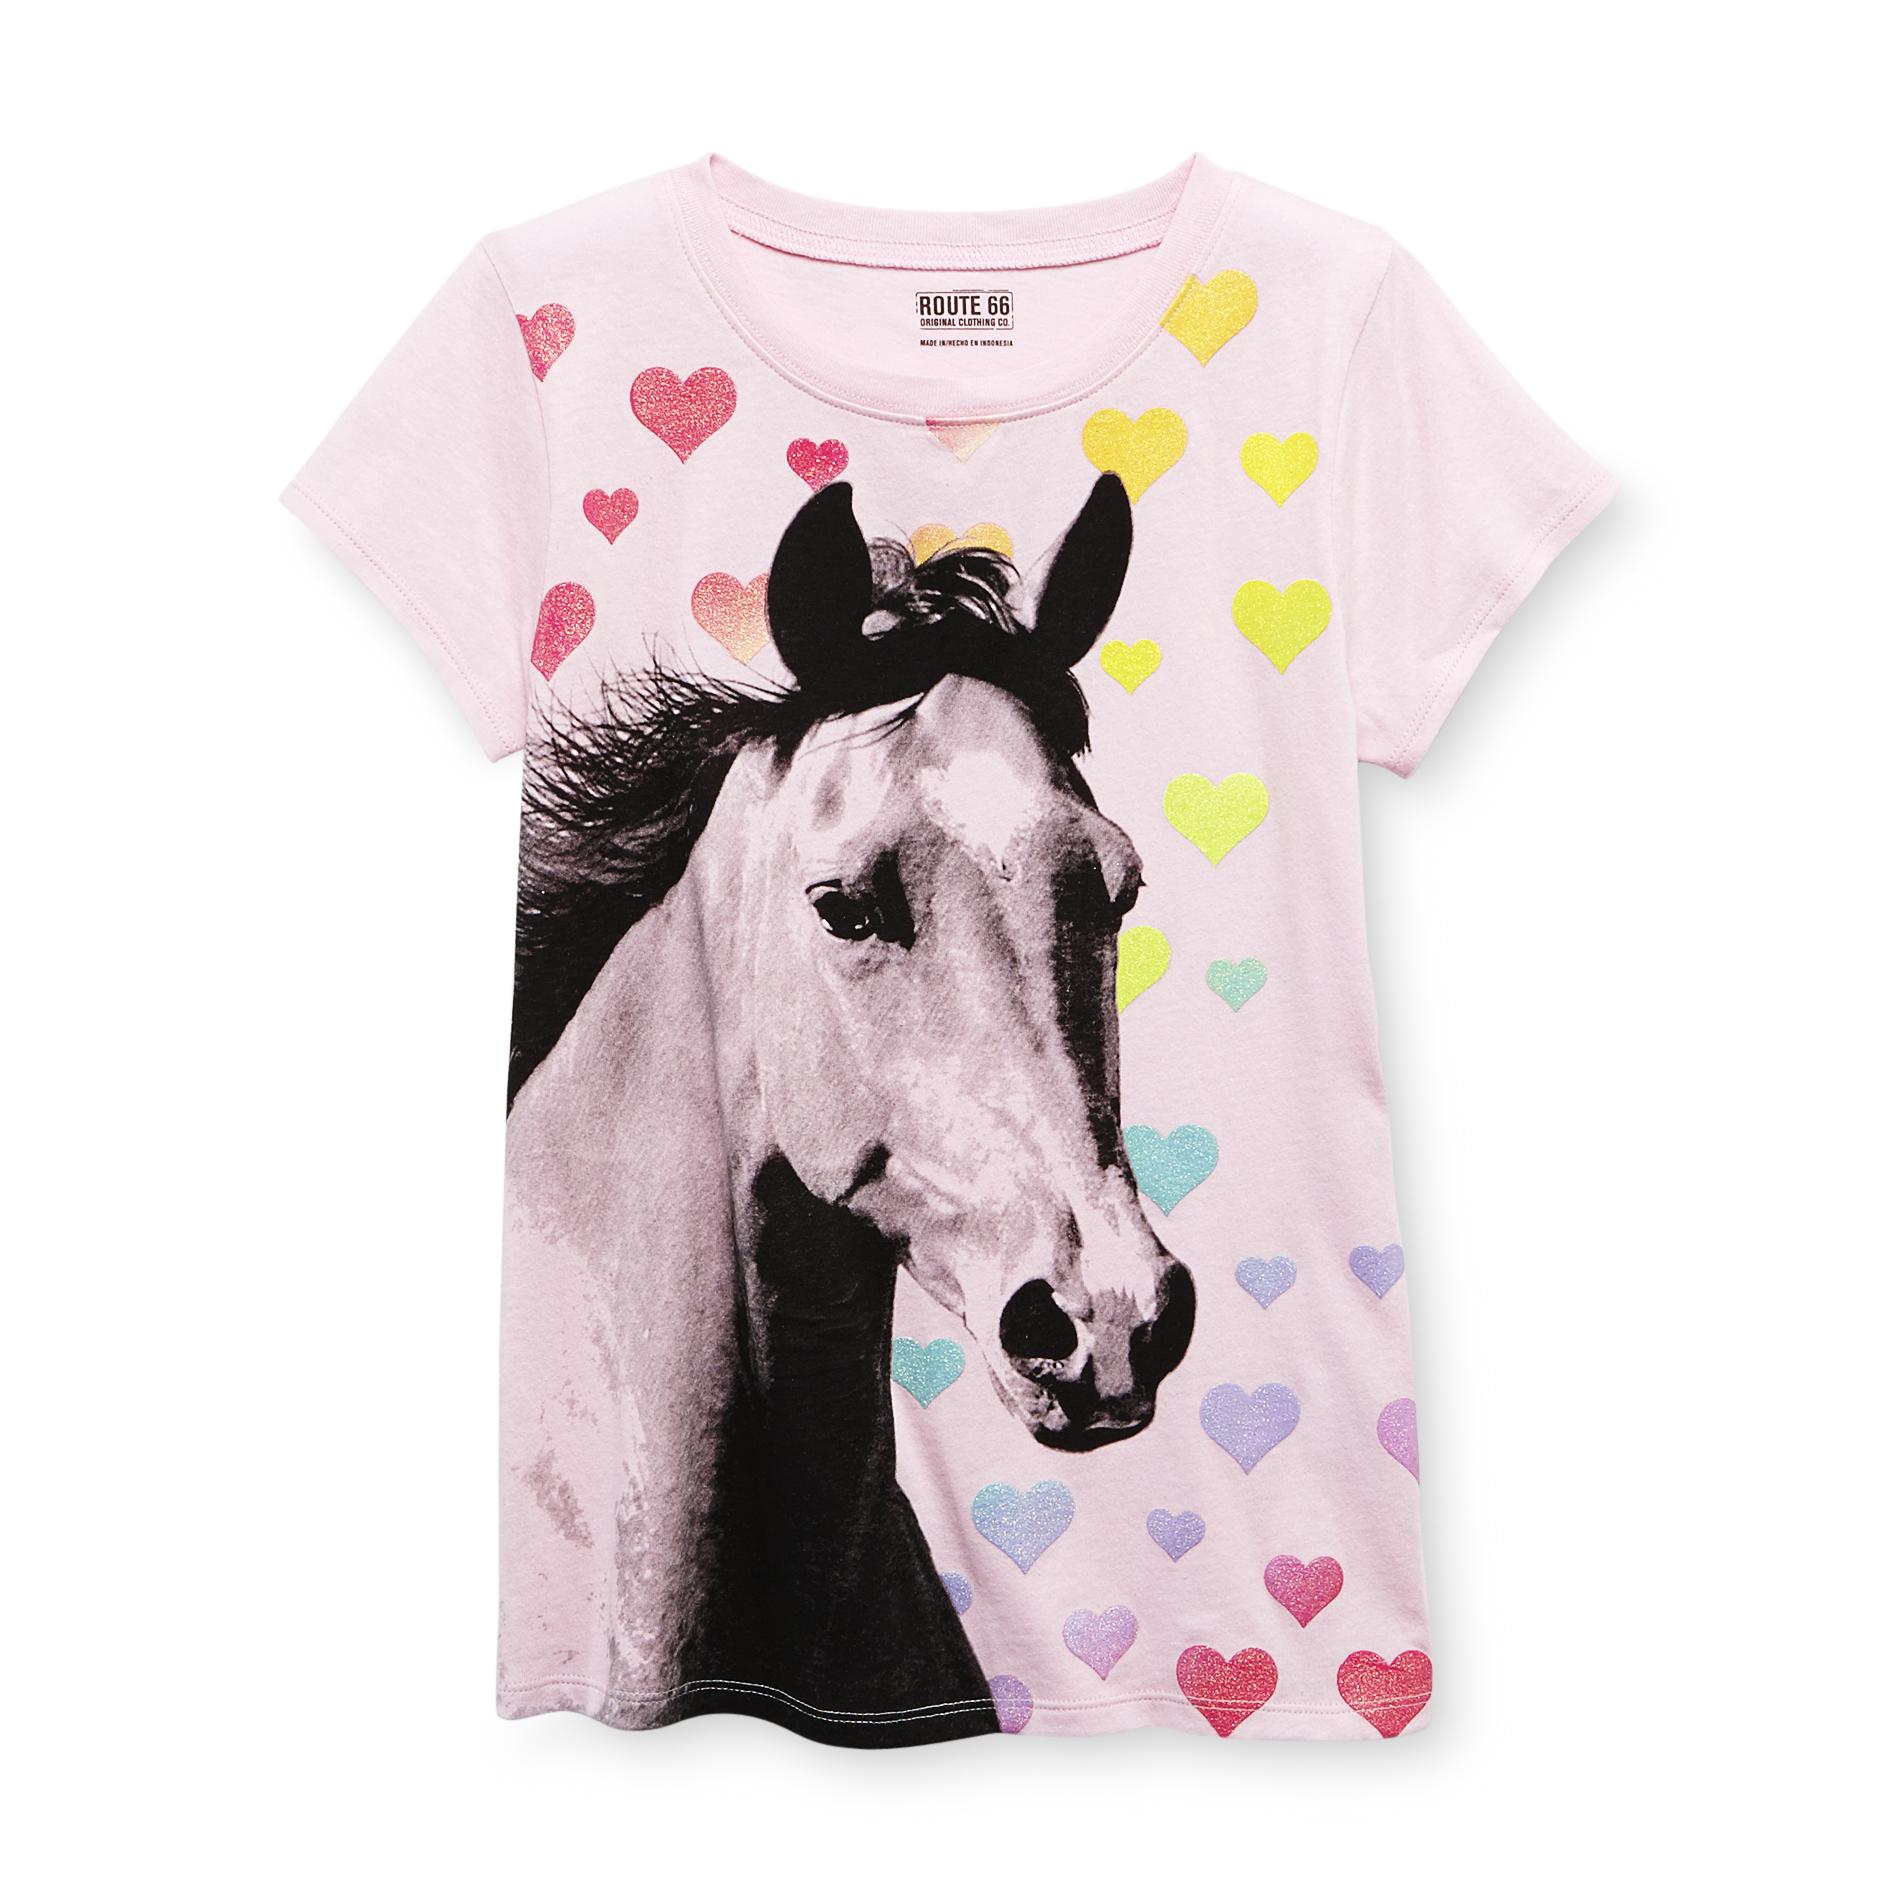 Route 66 Girl's Graphic T-Shirt - Horse & Glittered Hearts